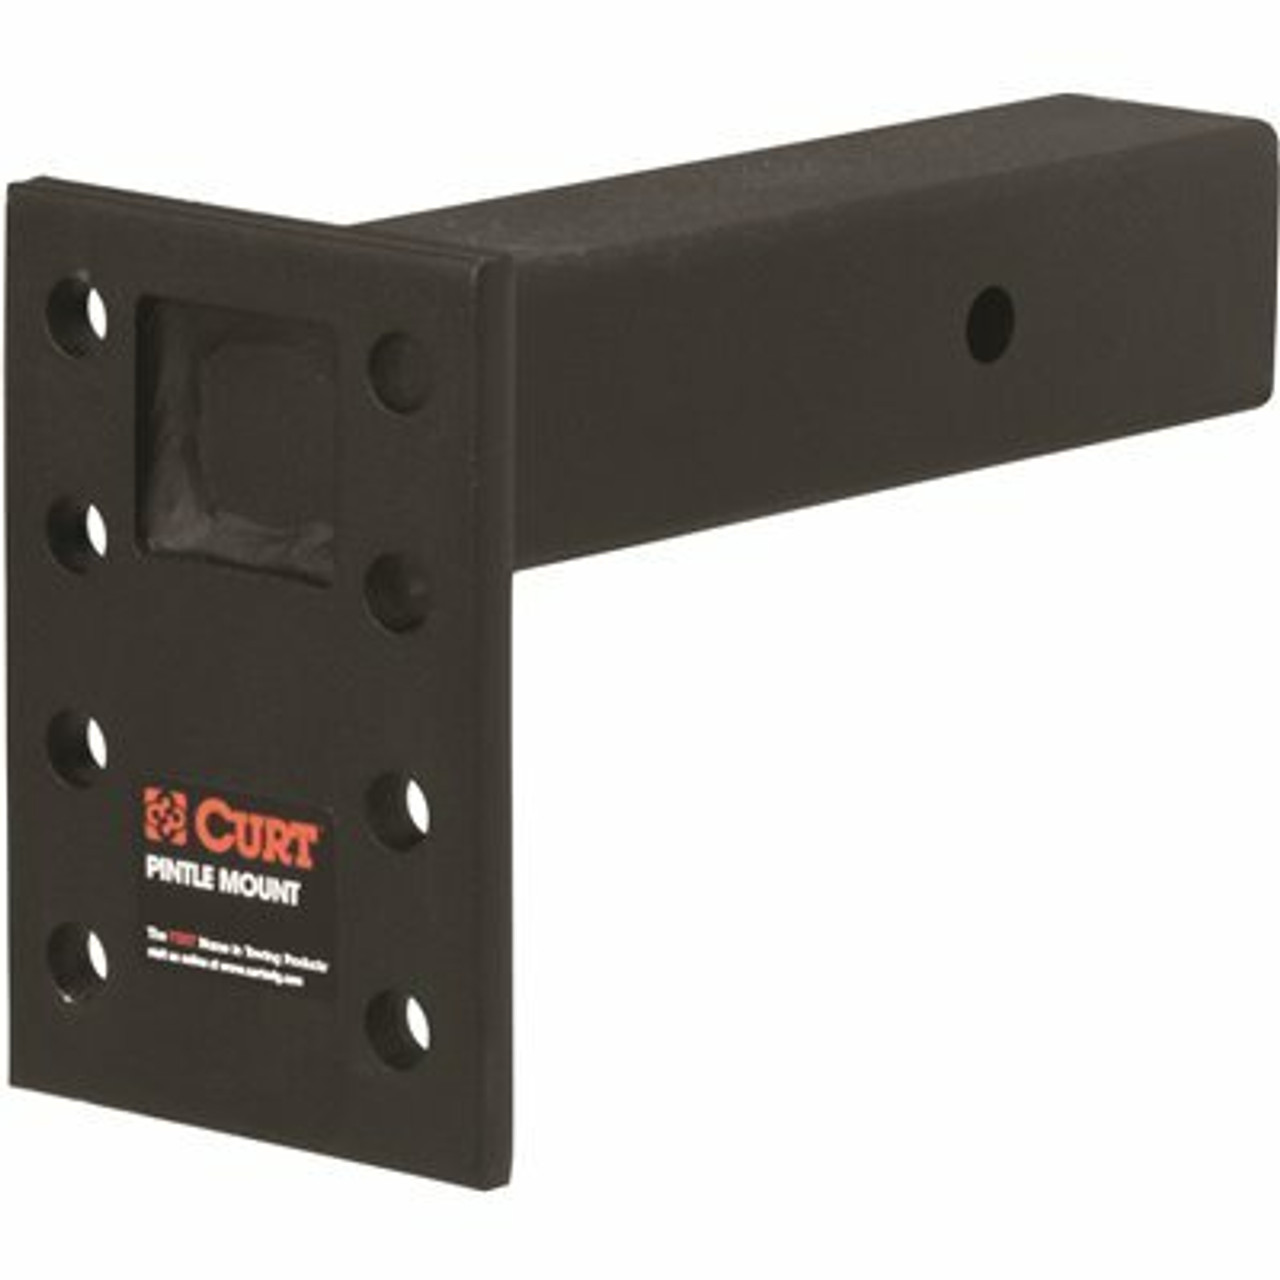 Curt Adjustable Pintle Mount (2-1/2 In. Shank, 18,000 Lbs., 7 In. H, 8 In. L)